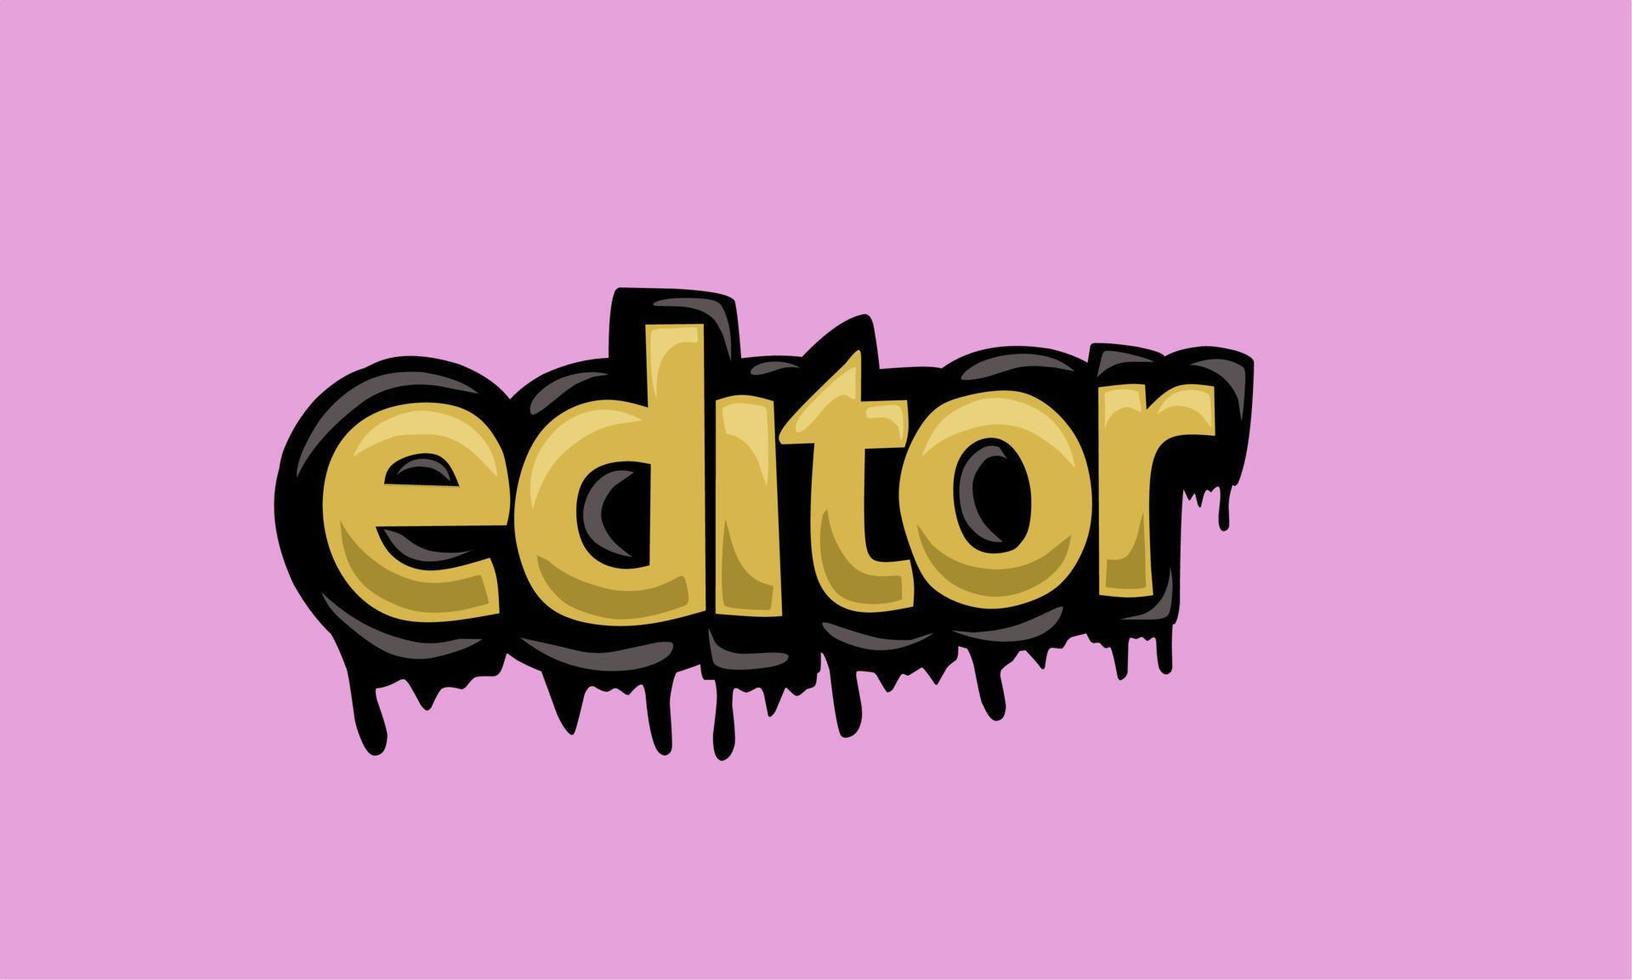 EDITOR writing vector design on pink background